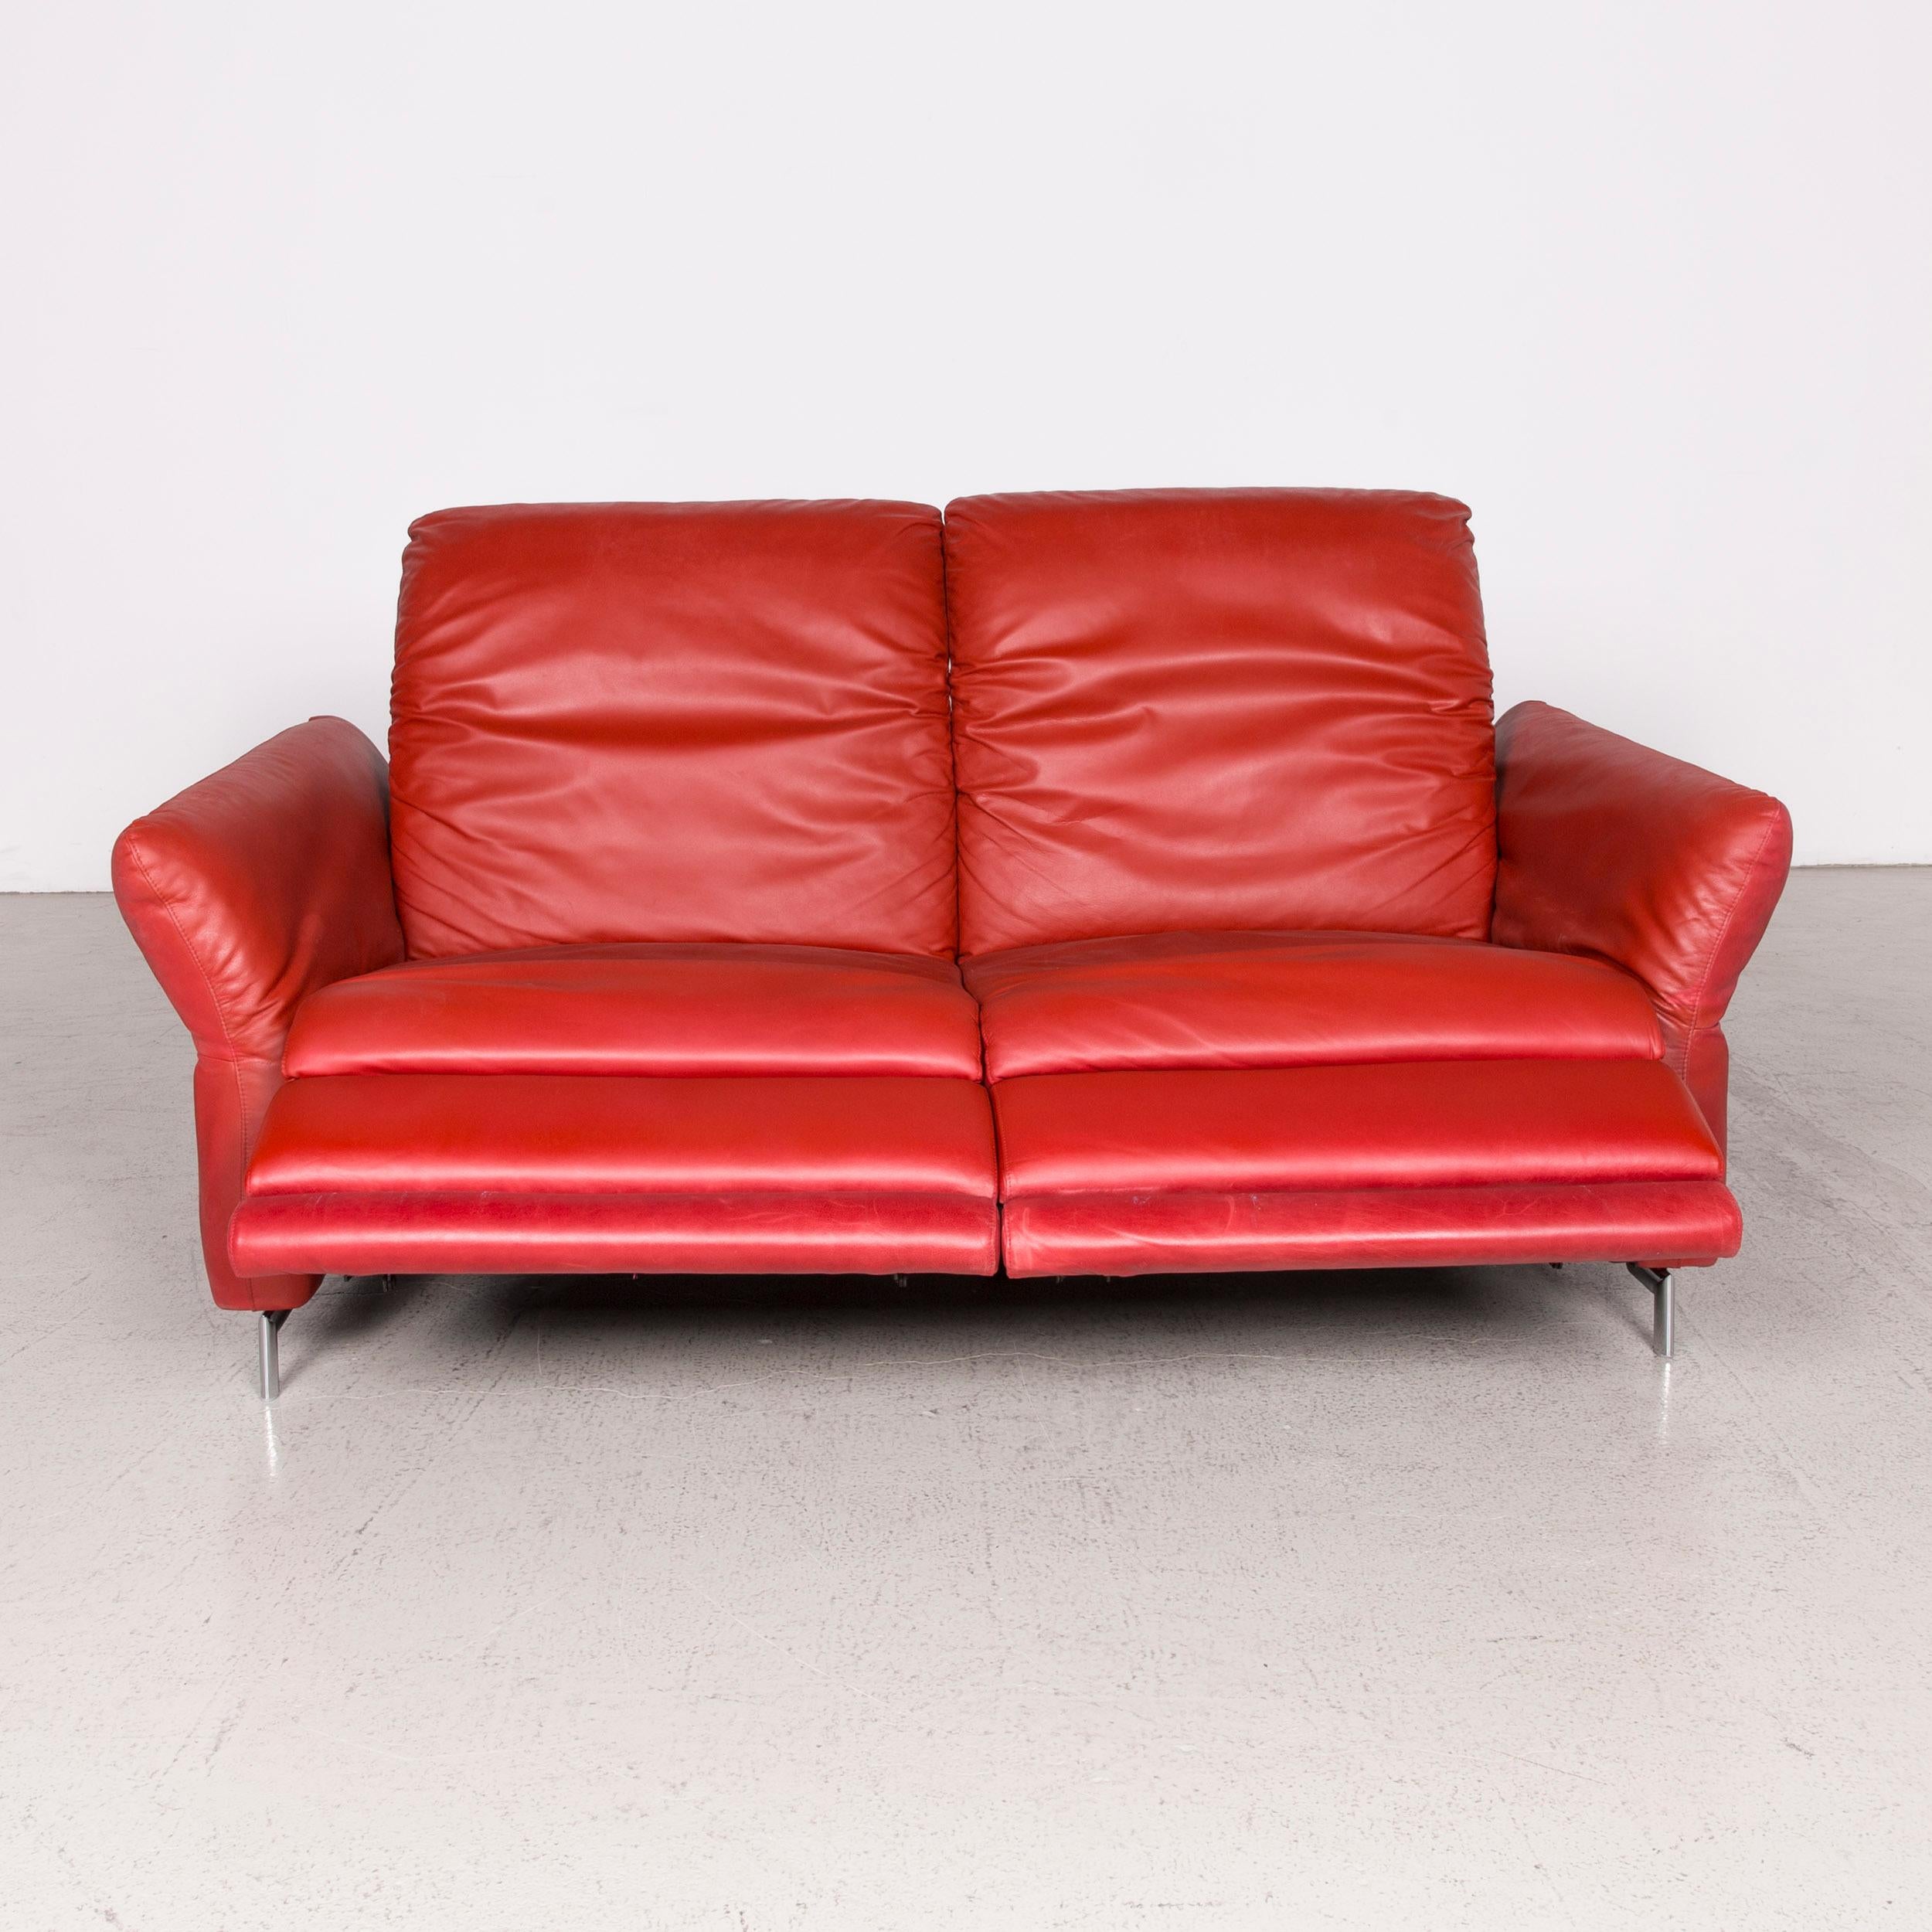 German Willi Schillig Siena Designer Leather Sofa Red Real Leather Dreisityer Couch For Sale